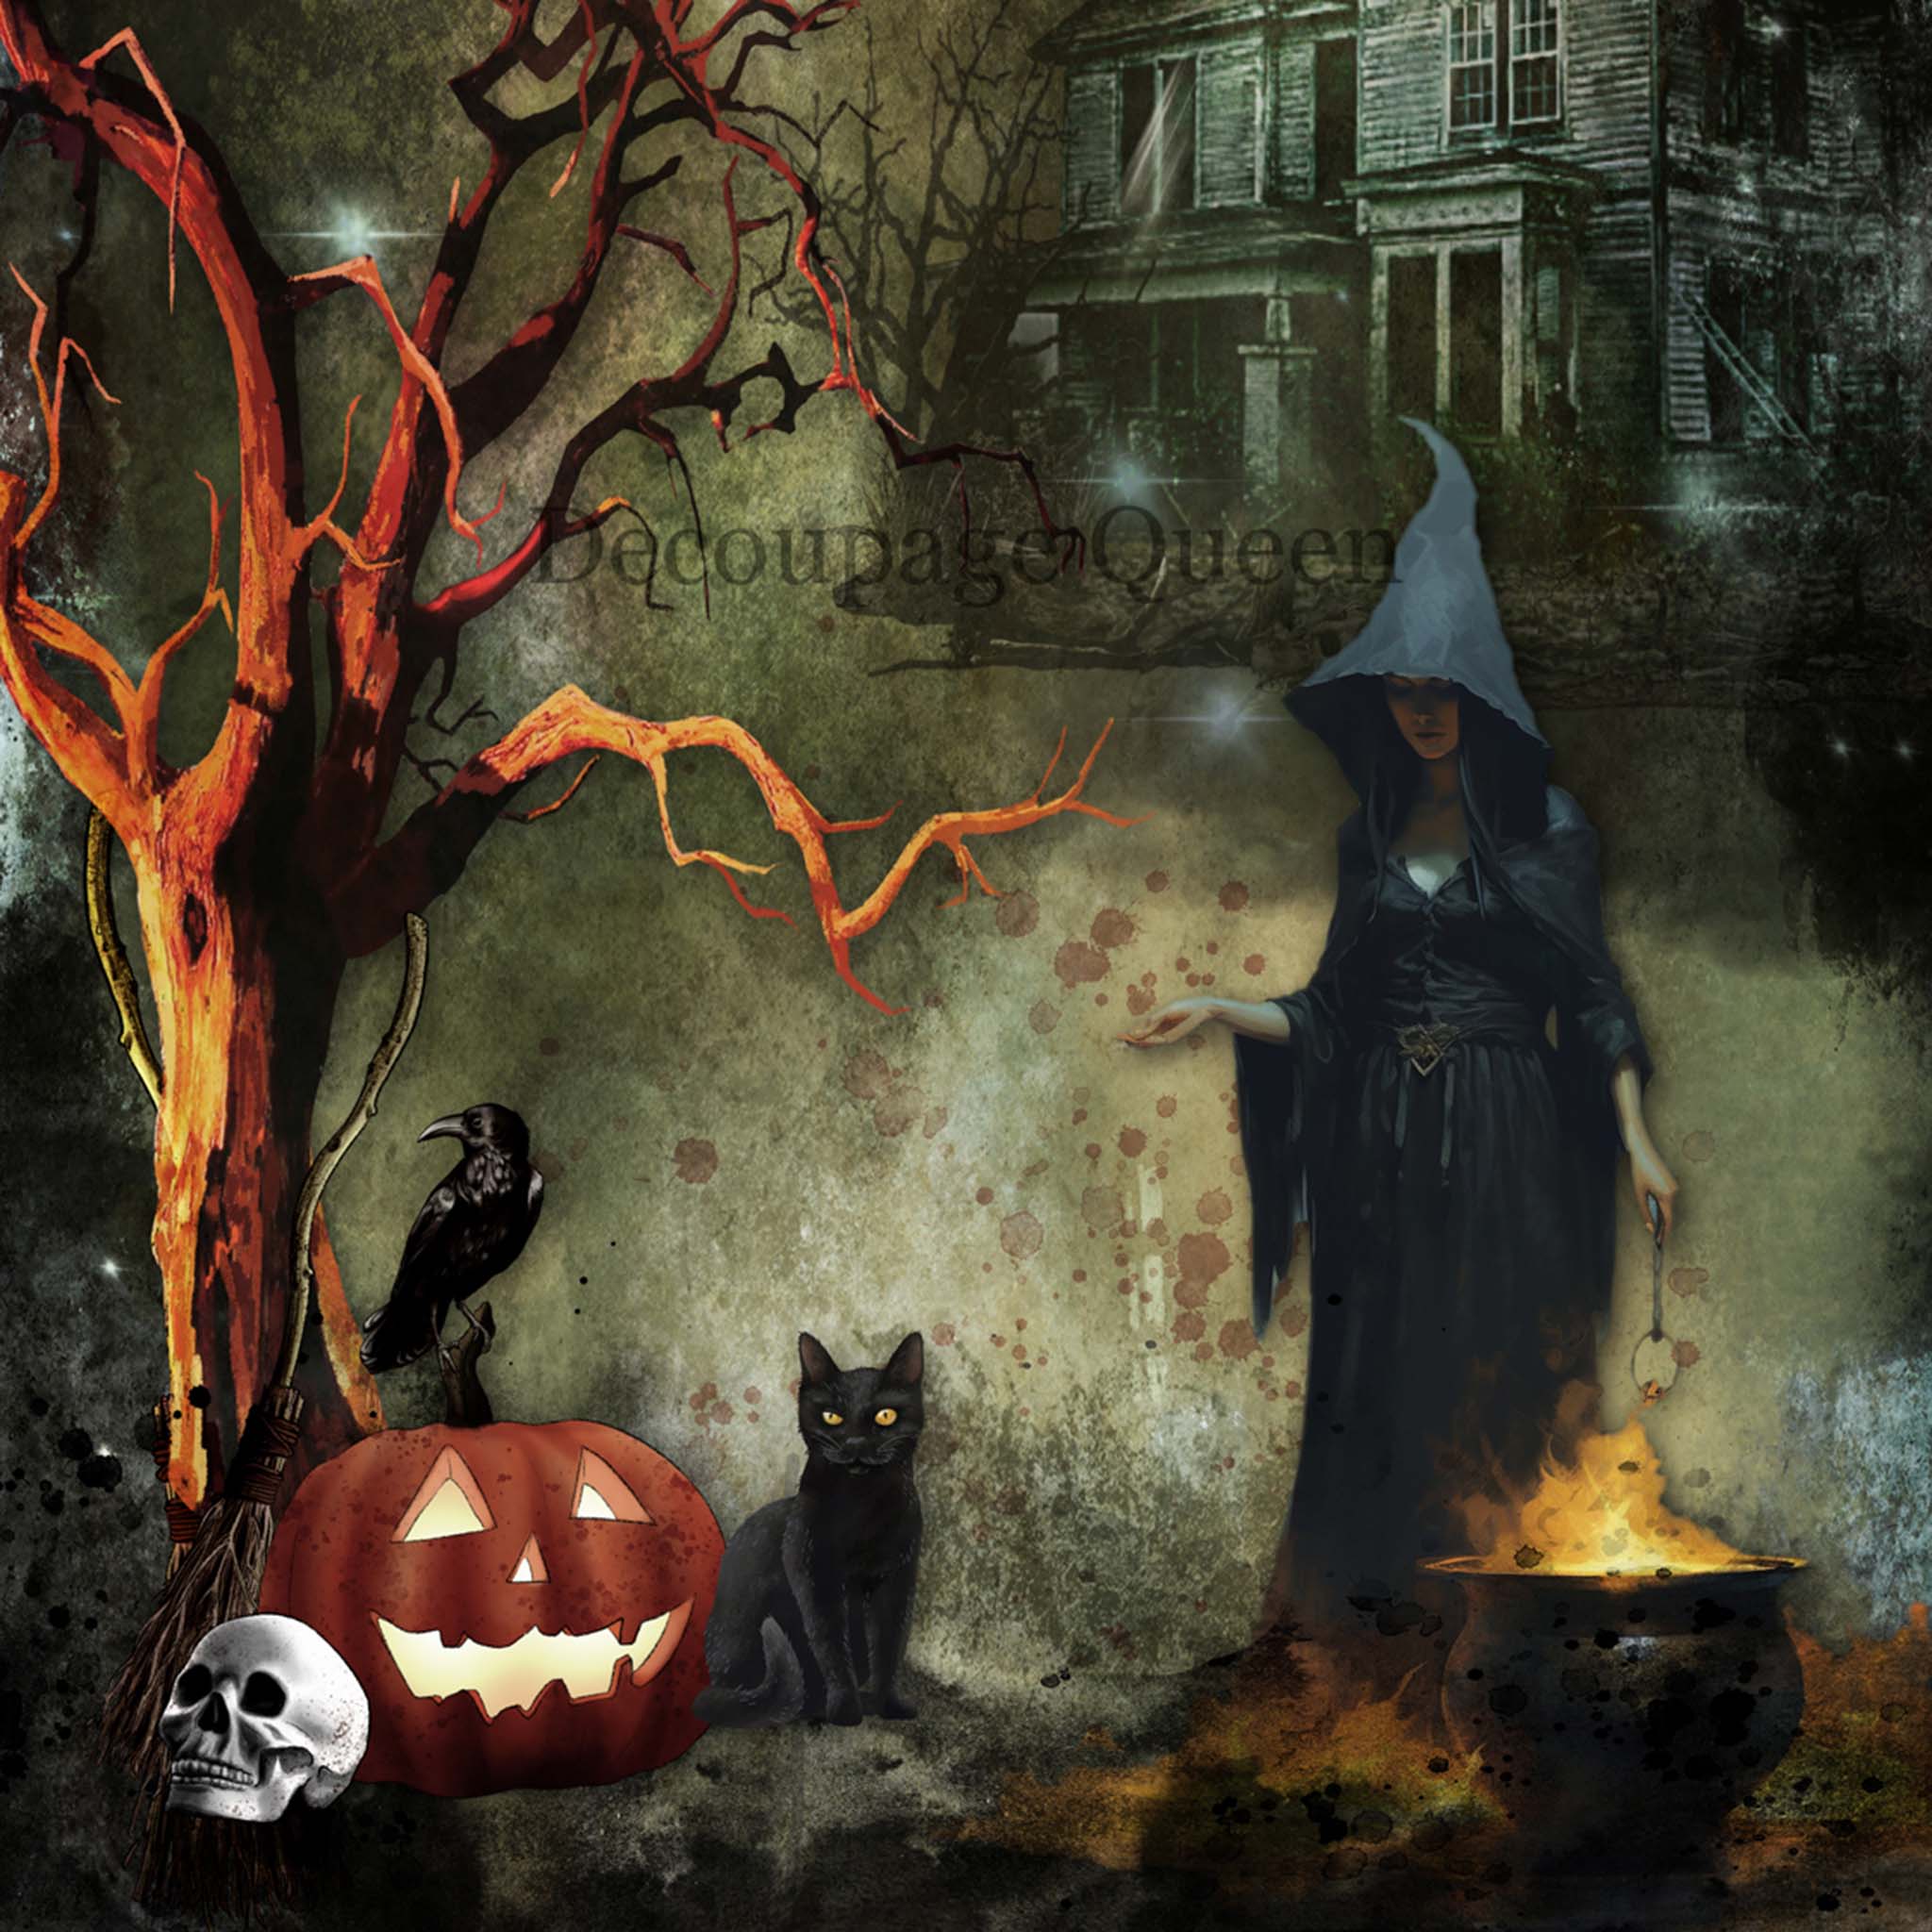 A4 decoupage paper tht features a collage of a black cat, Jack-O-Lantern, skull, bare tree, a raven, and a woman in a black dress and pointy hood over a cauldron all against a grunge background with a spooky old wood house.